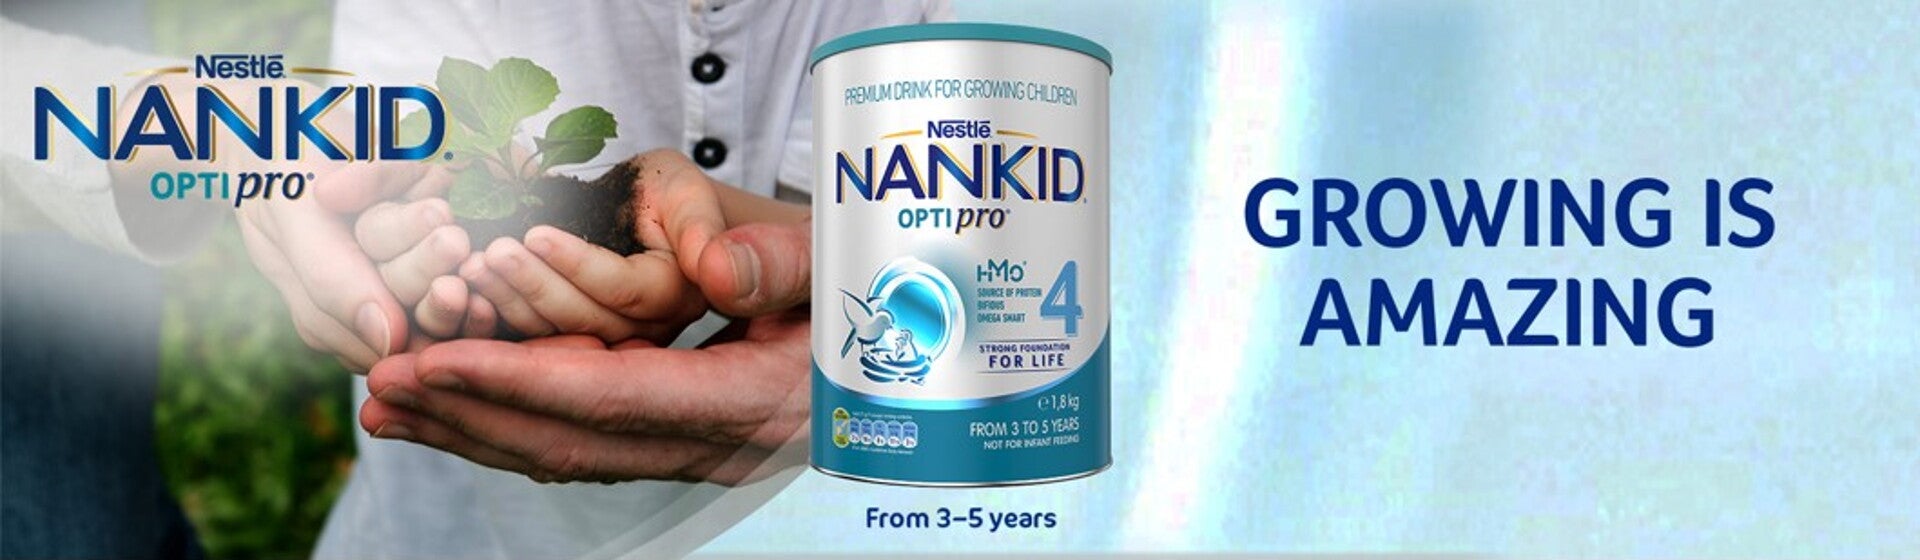 Growing is amazing with Nestlé Nankid OptiPro 4. A milk powder for growing children from 3 to 5 years old.